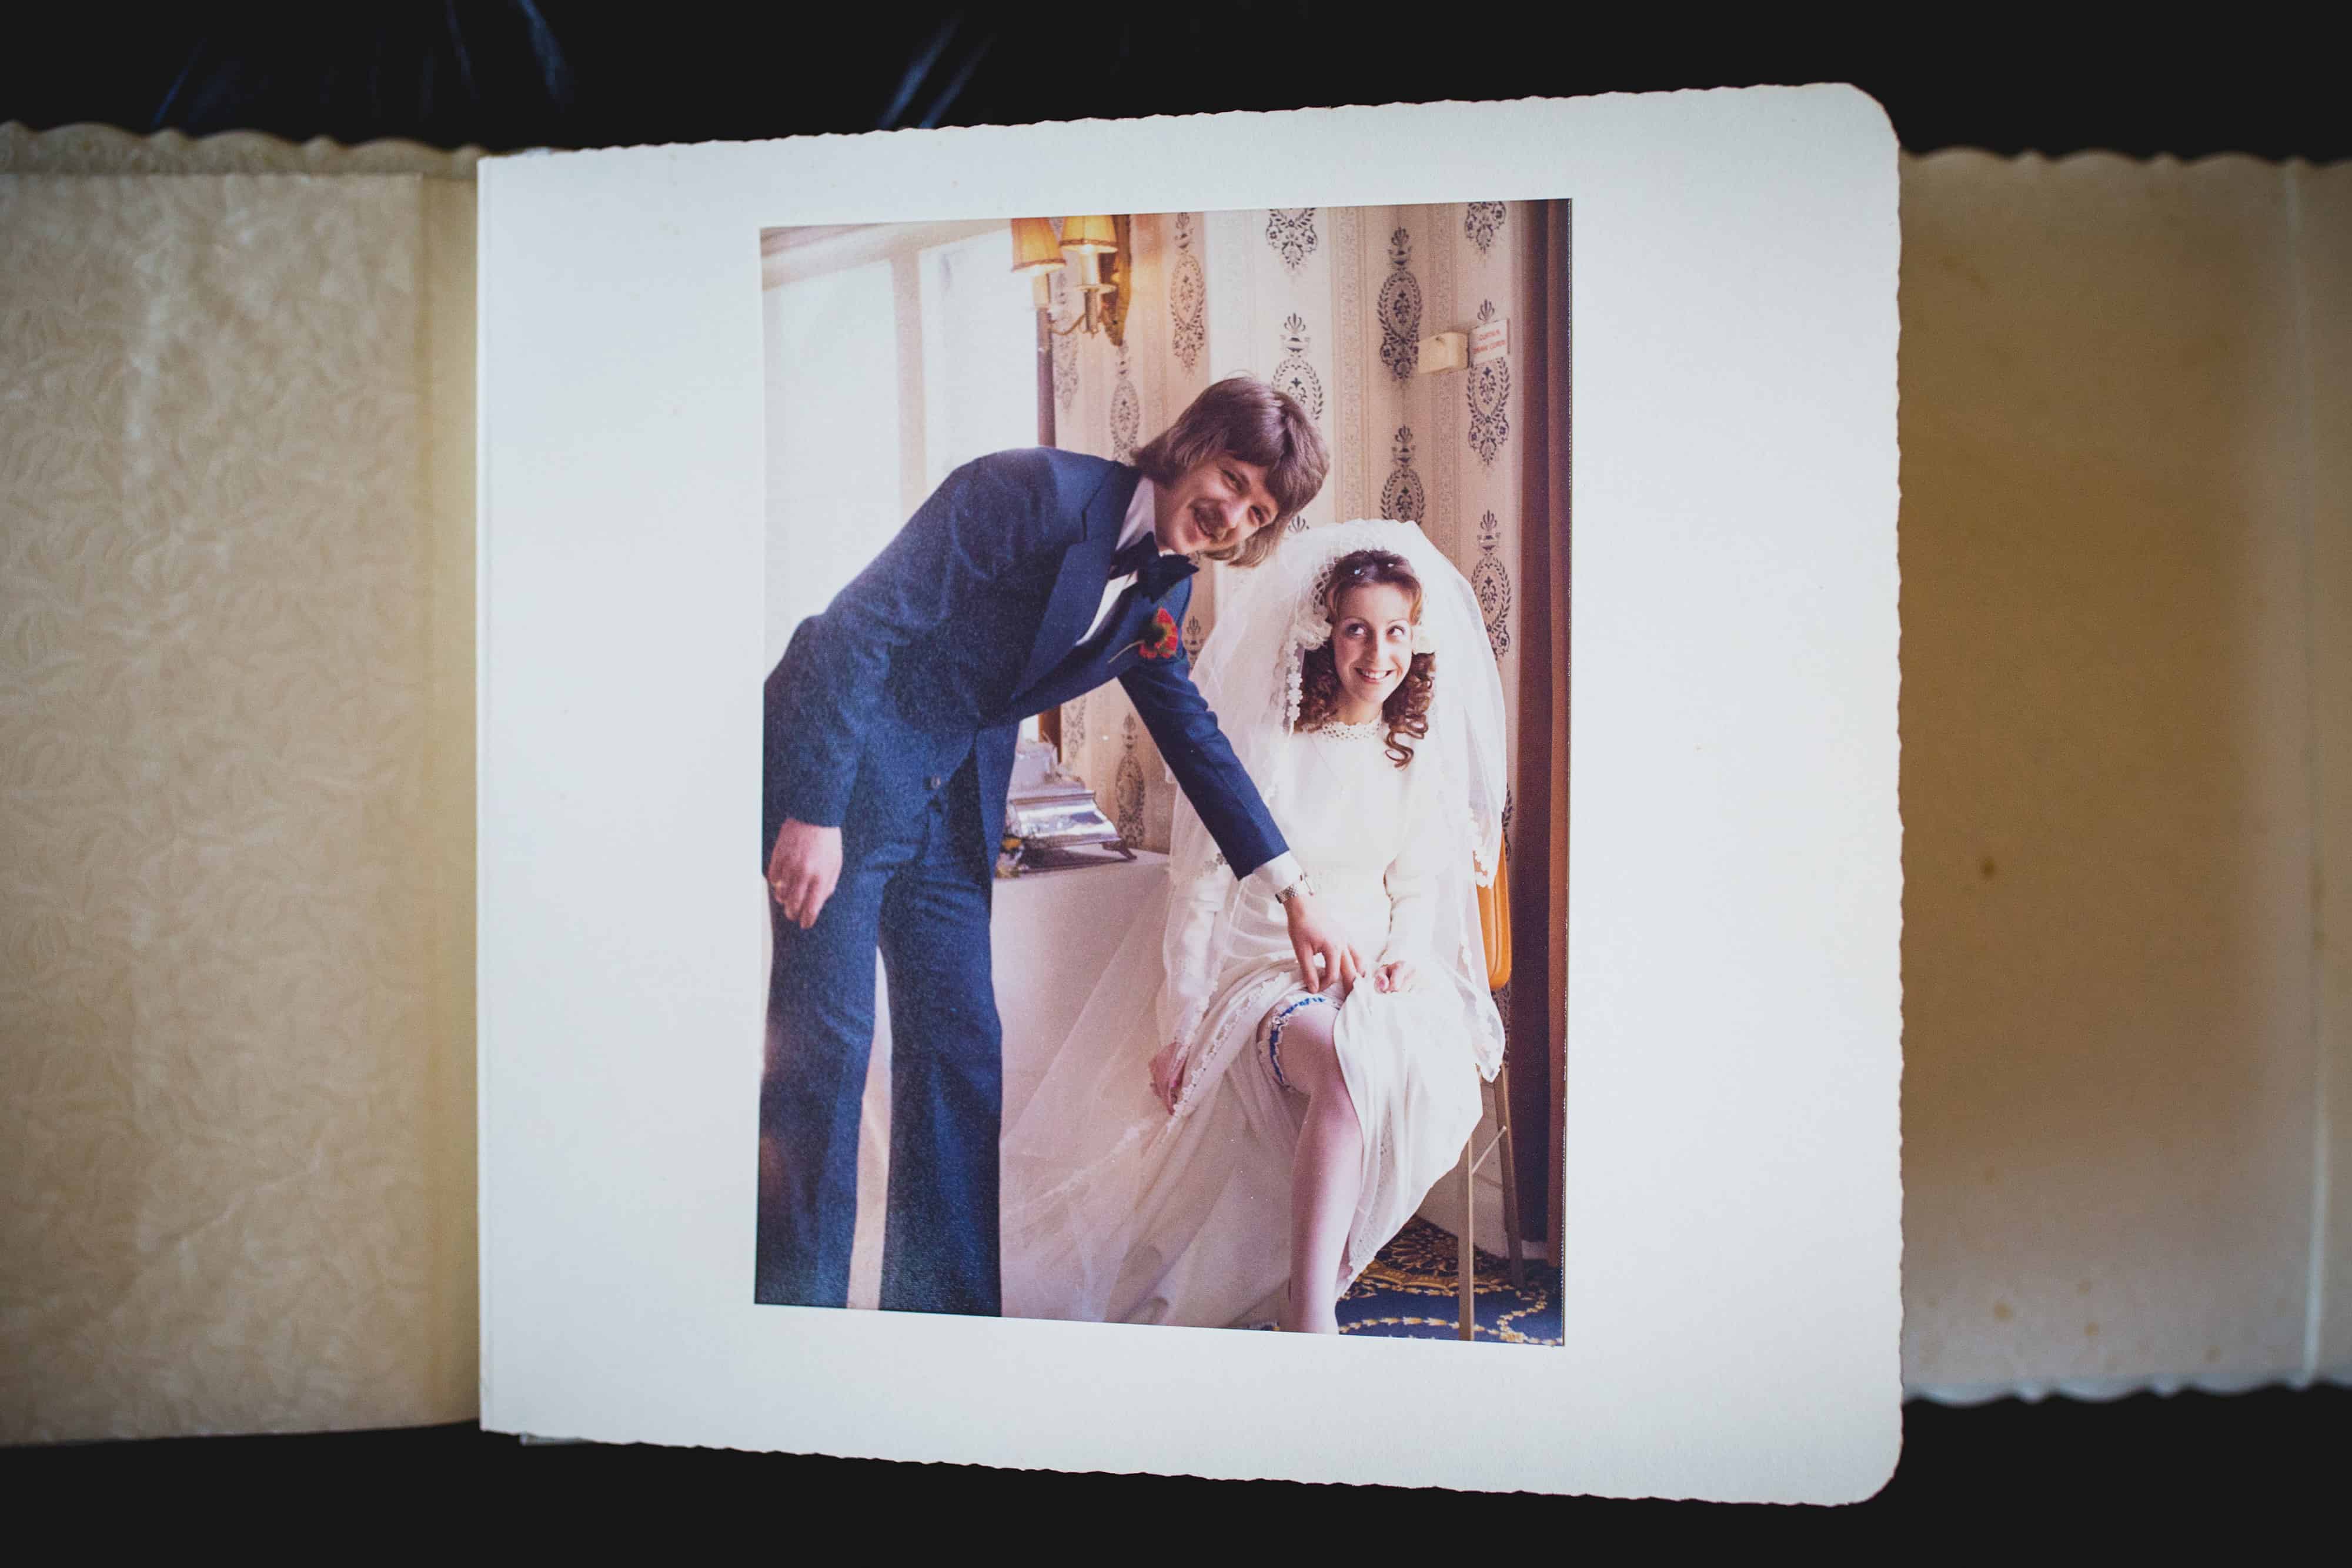 Jacci and Mike Bowden's wedding photo album